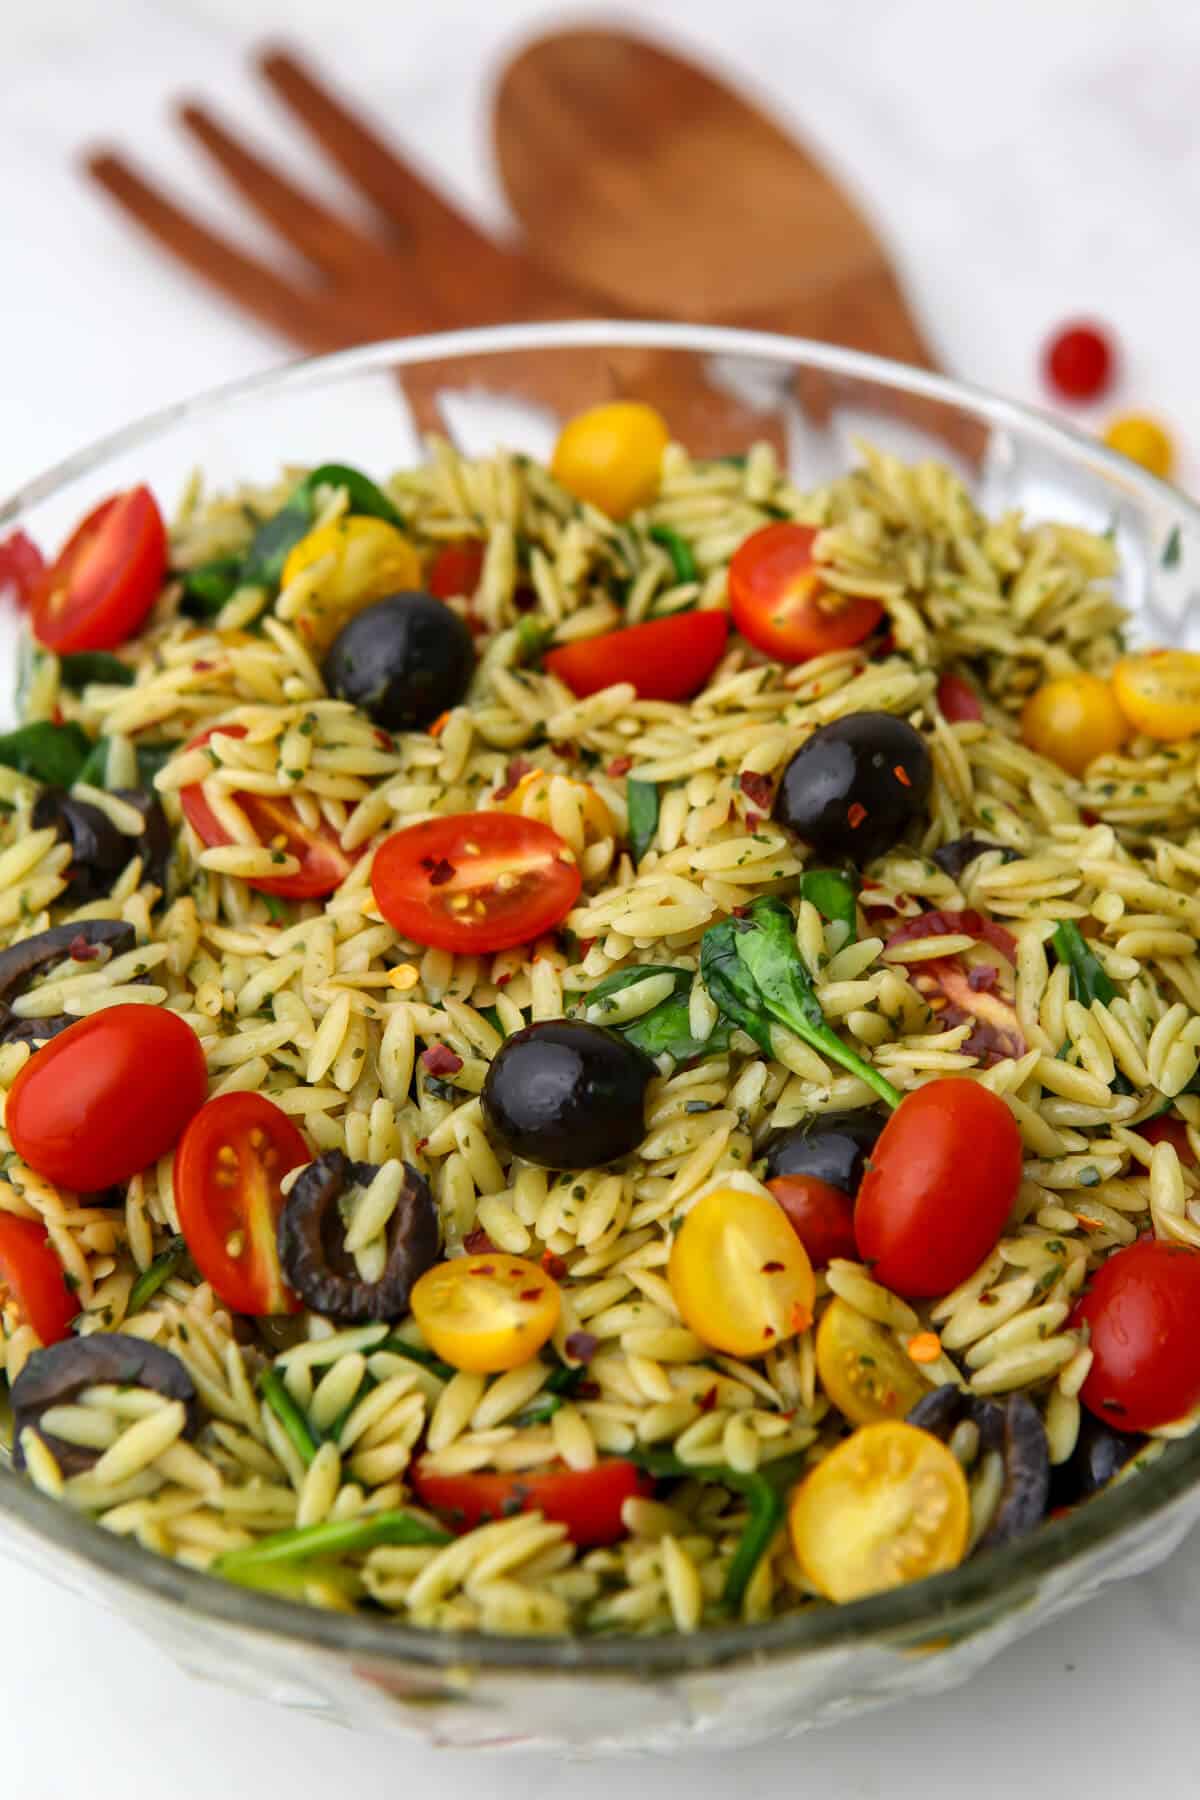 A vegan pesto orzo salad made with spinach, tomatoes, and olives served in a glass salad bowl.